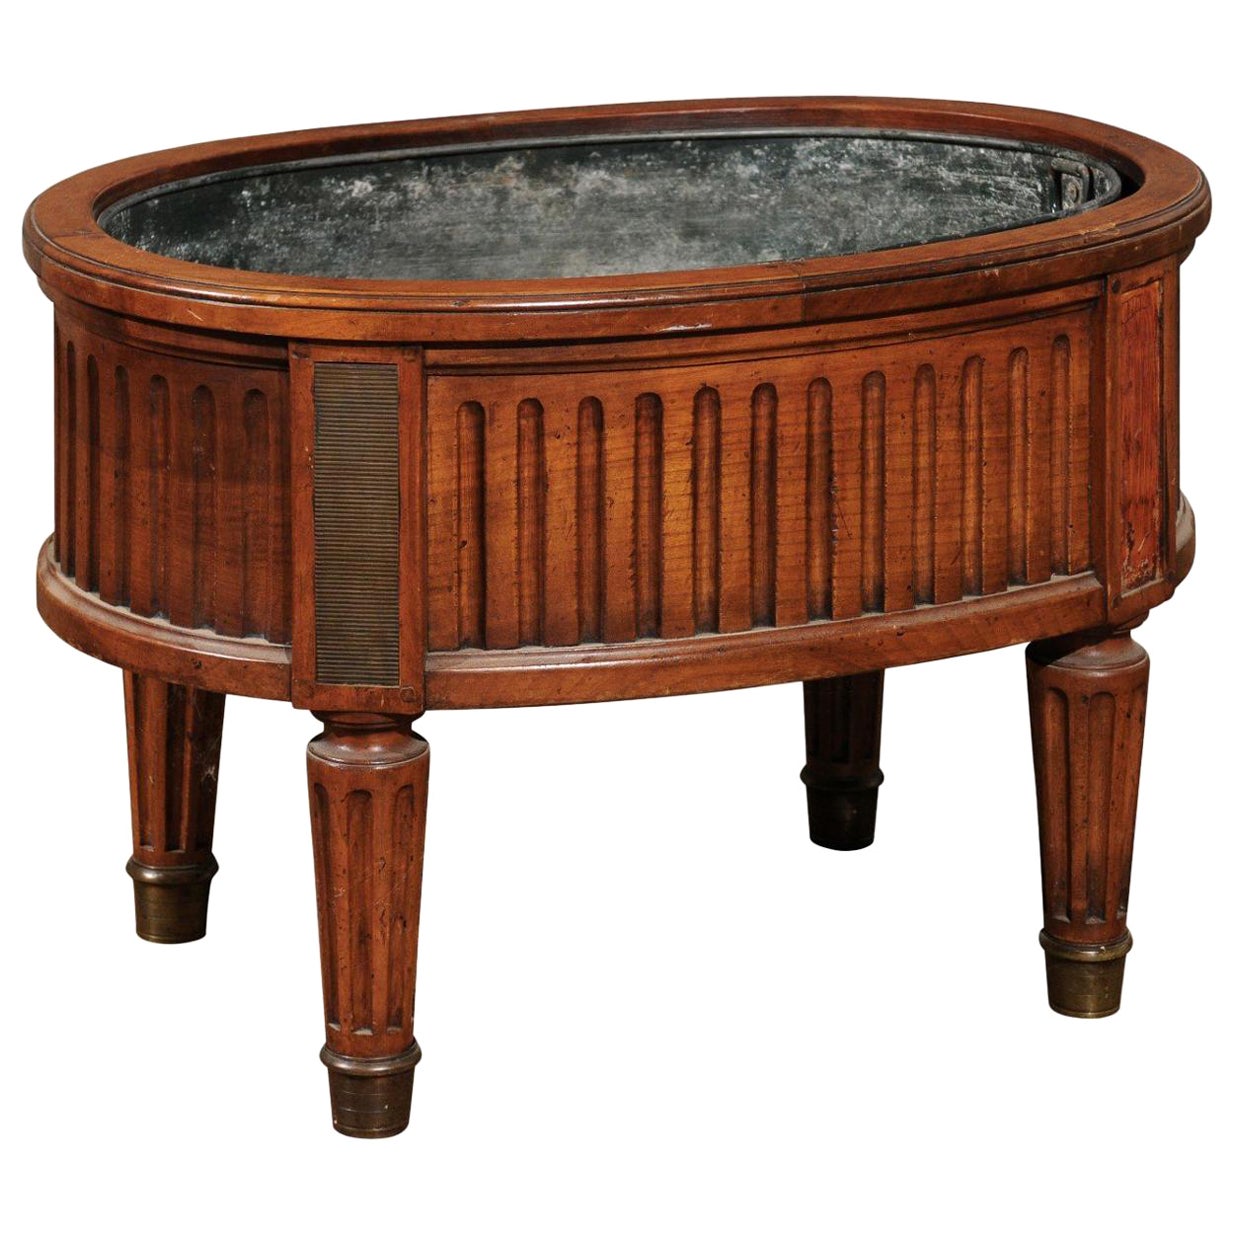 French 19th Century Neoclassical Style Cherry Jardinière with Tin-Lined Interior For Sale